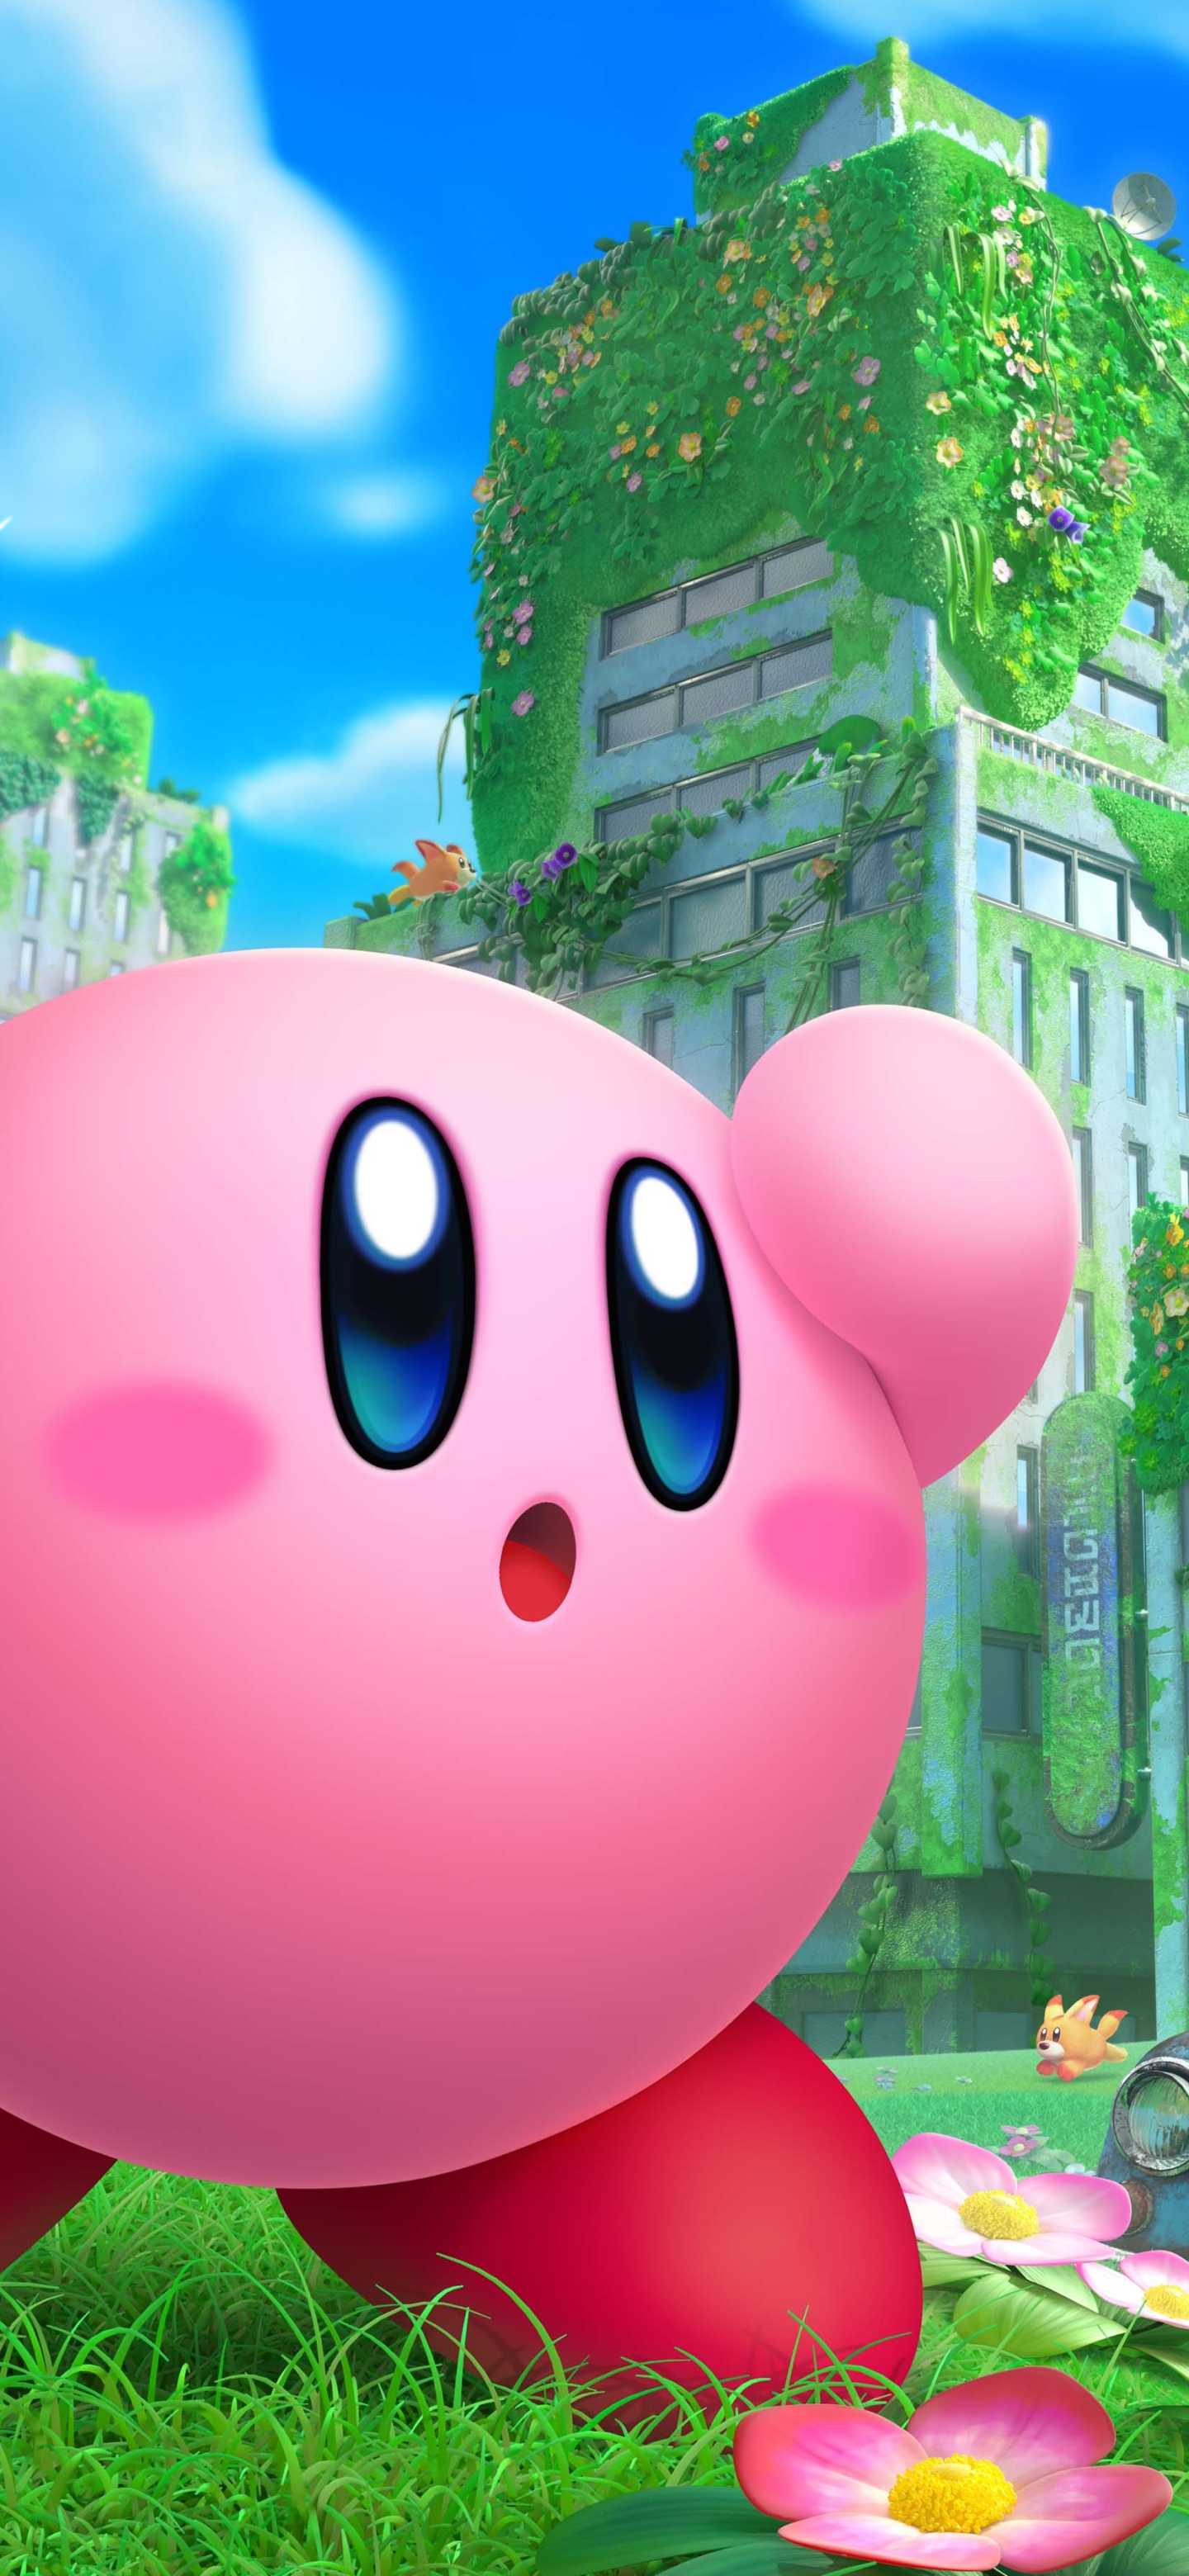 kirby and the forgotten land, kirby, video game